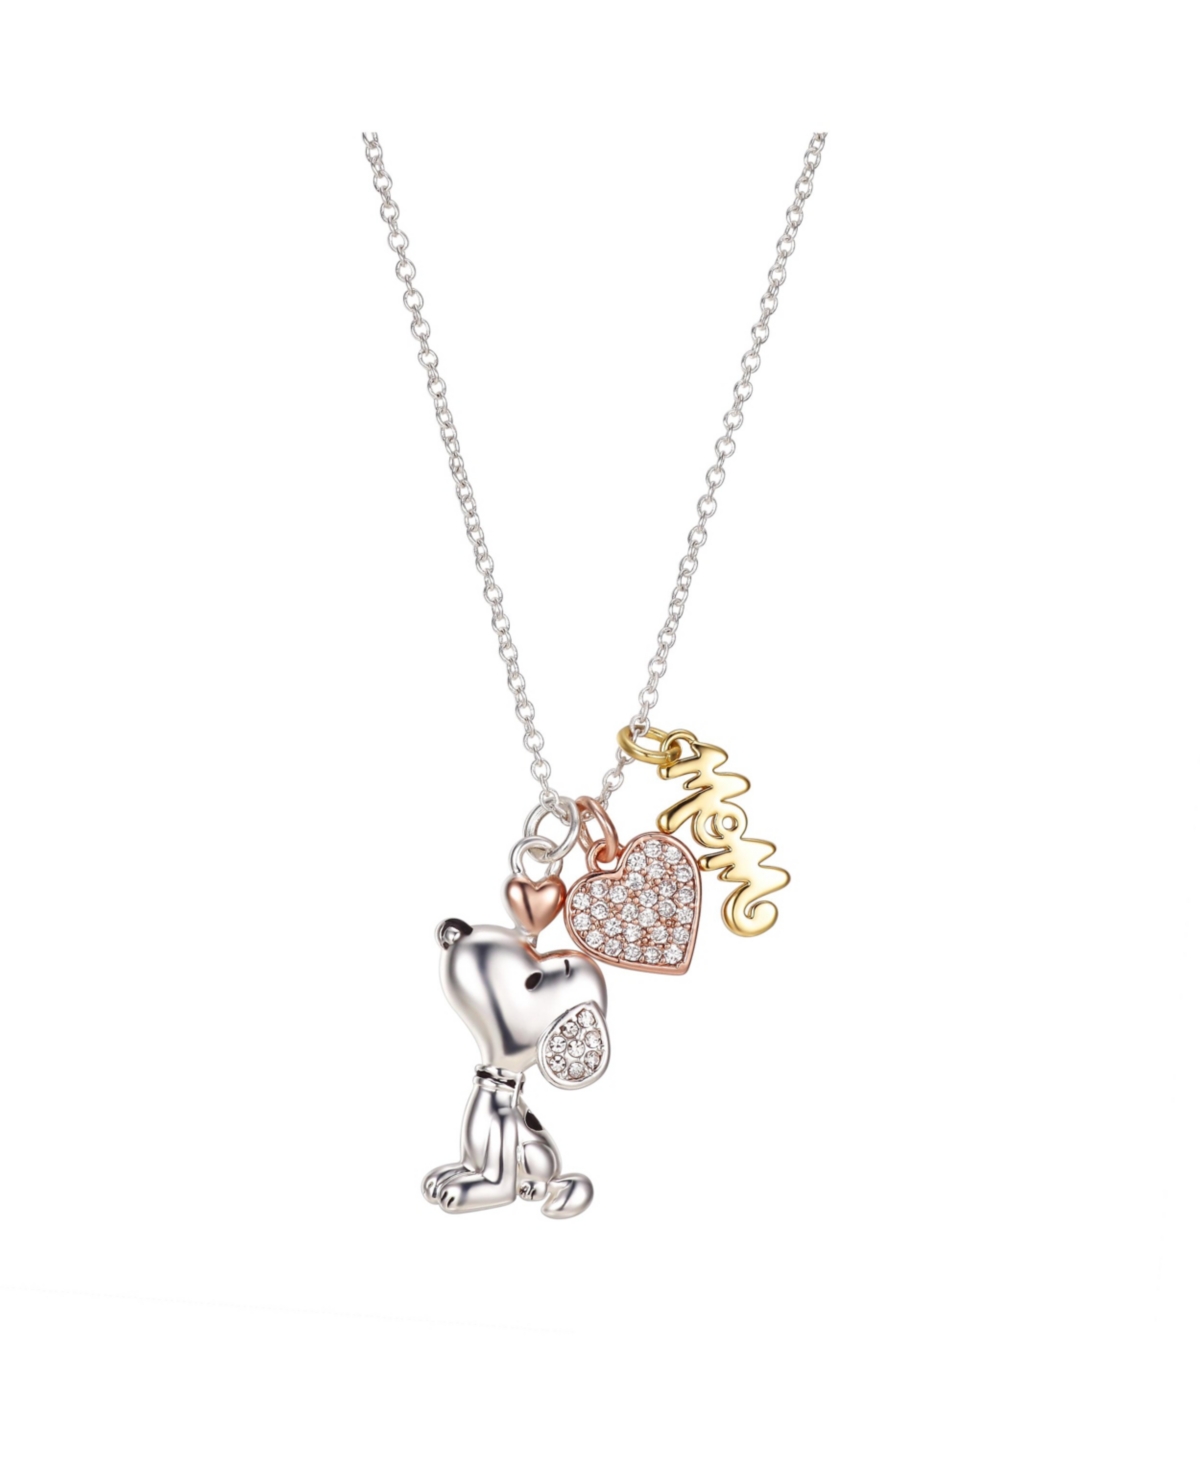 Gold Flash Plated "Mom" Snoopy and Cubic Zirconia Heart Necklace, 16"+2" Extender - Silver